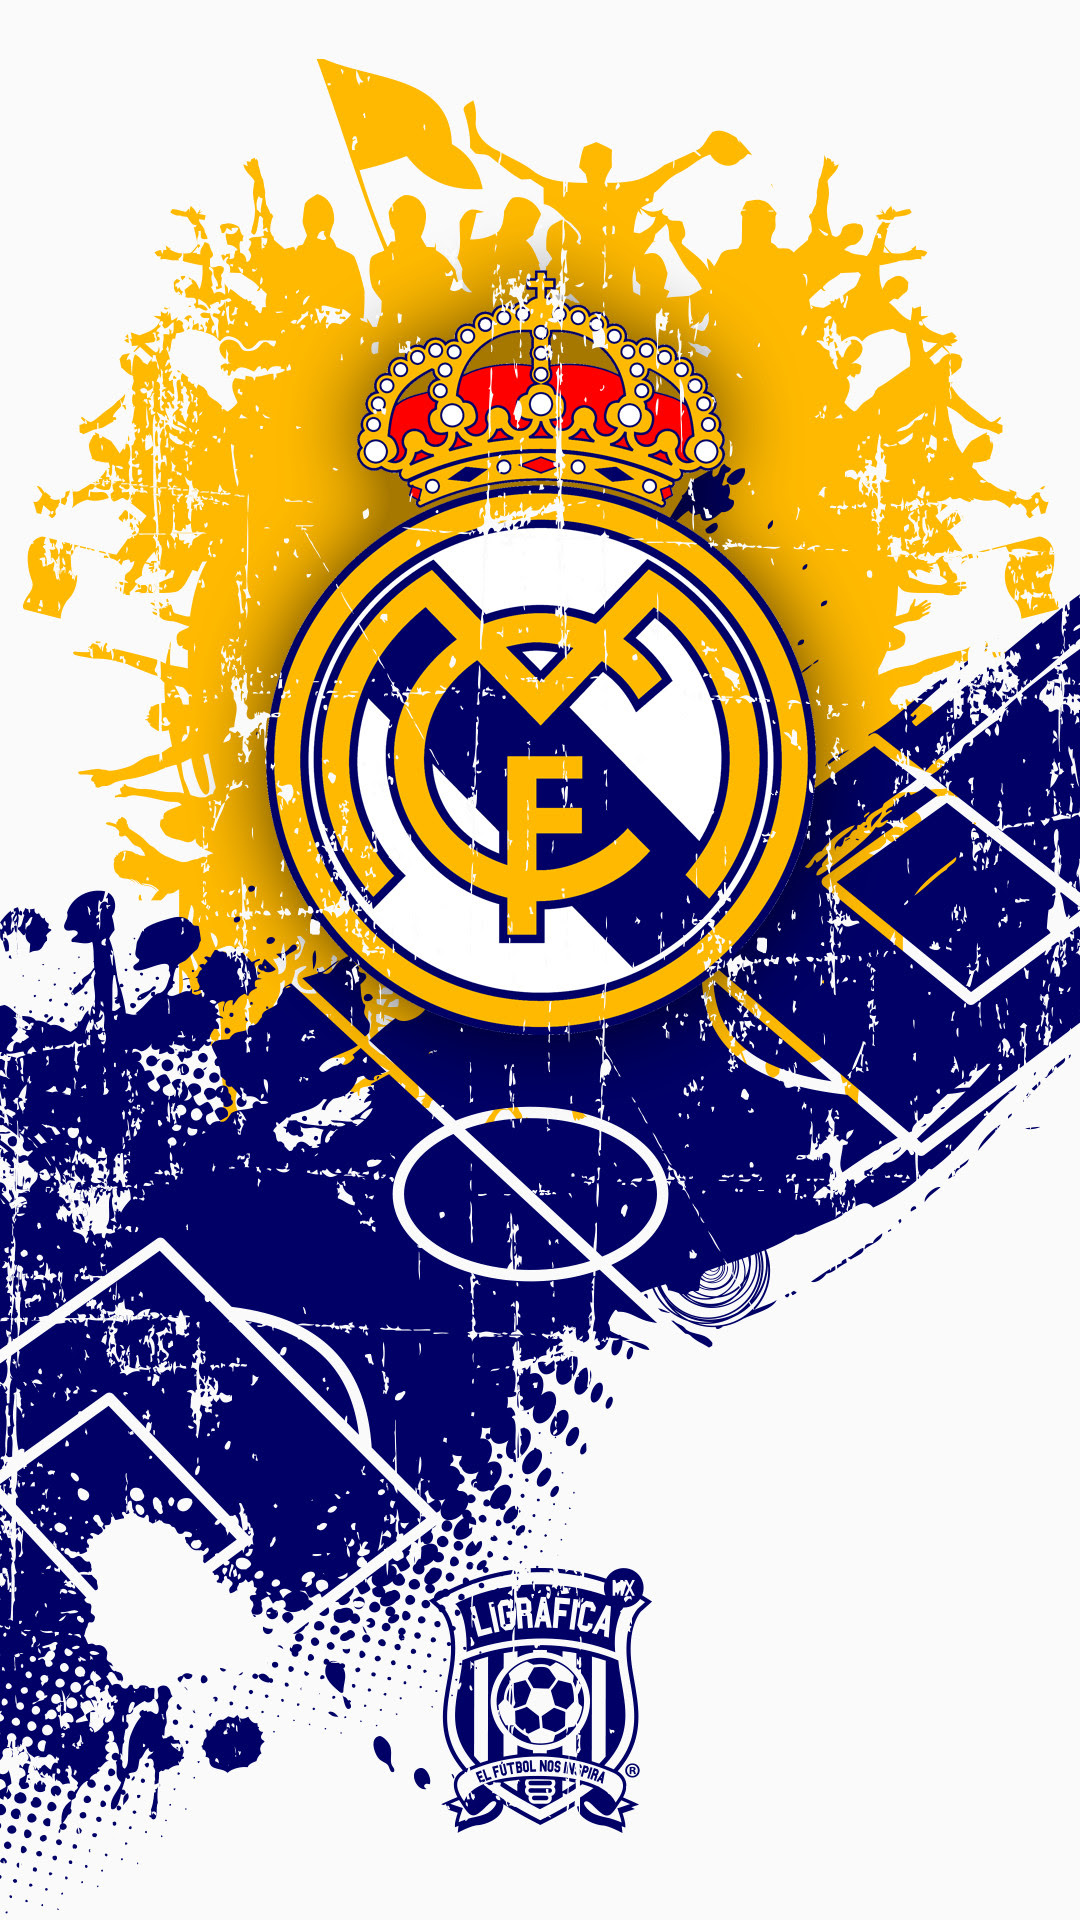 Real Madrid Logo Wallpaper 4k Also explore thousands of beautiful hd wallpapers and background images. real madrid logo wallpaper 4k